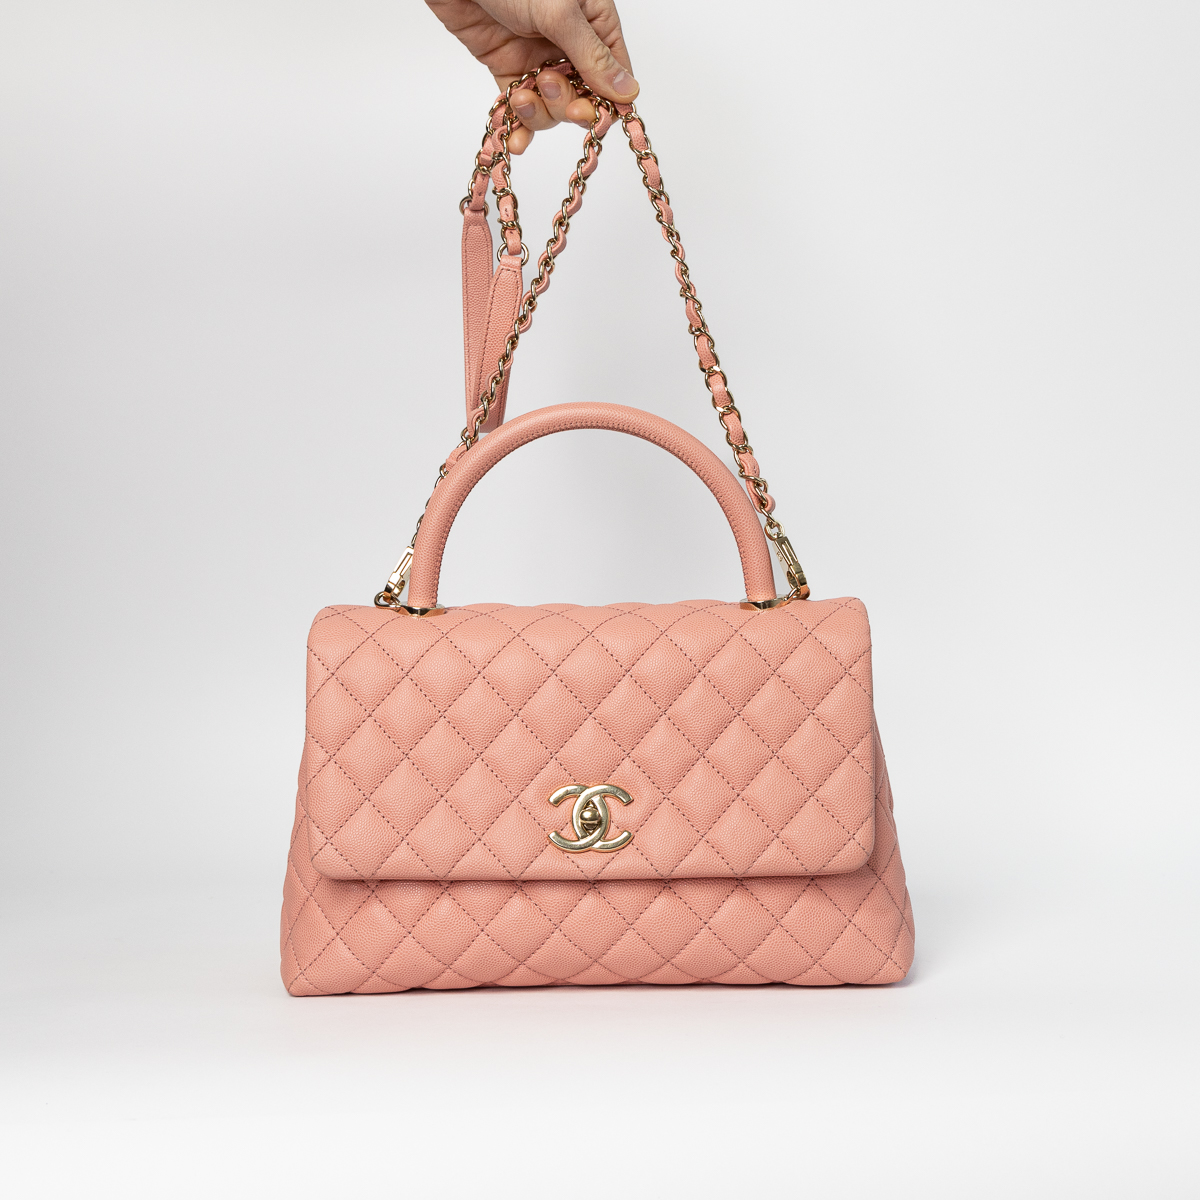 Chanel Coco Top Handle Medium Bag Pink Caviar with gold hardware